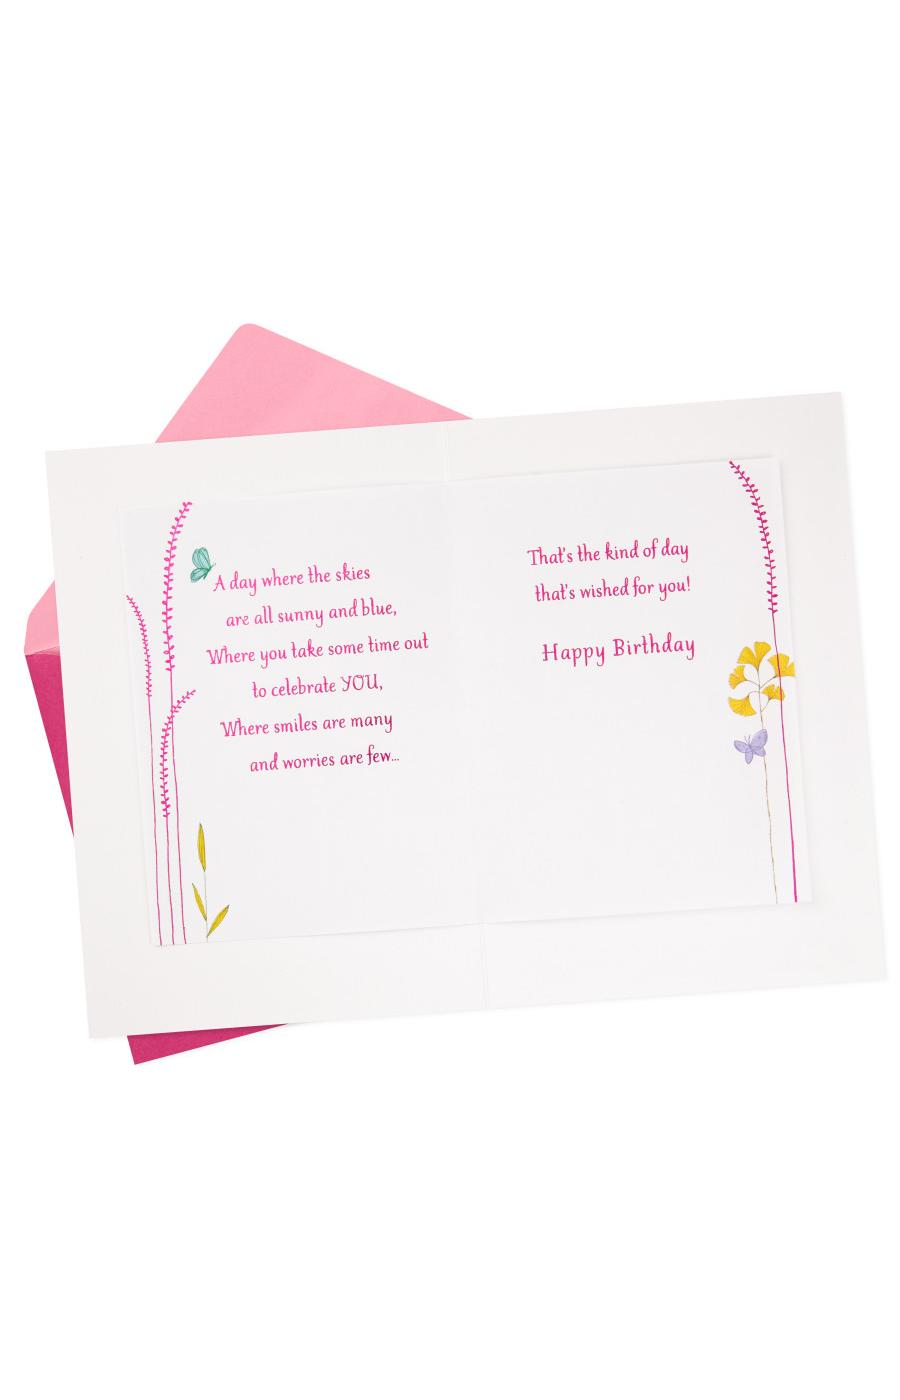 Hallmark Perfect Day for You Birthday Card - E17; image 2 of 7